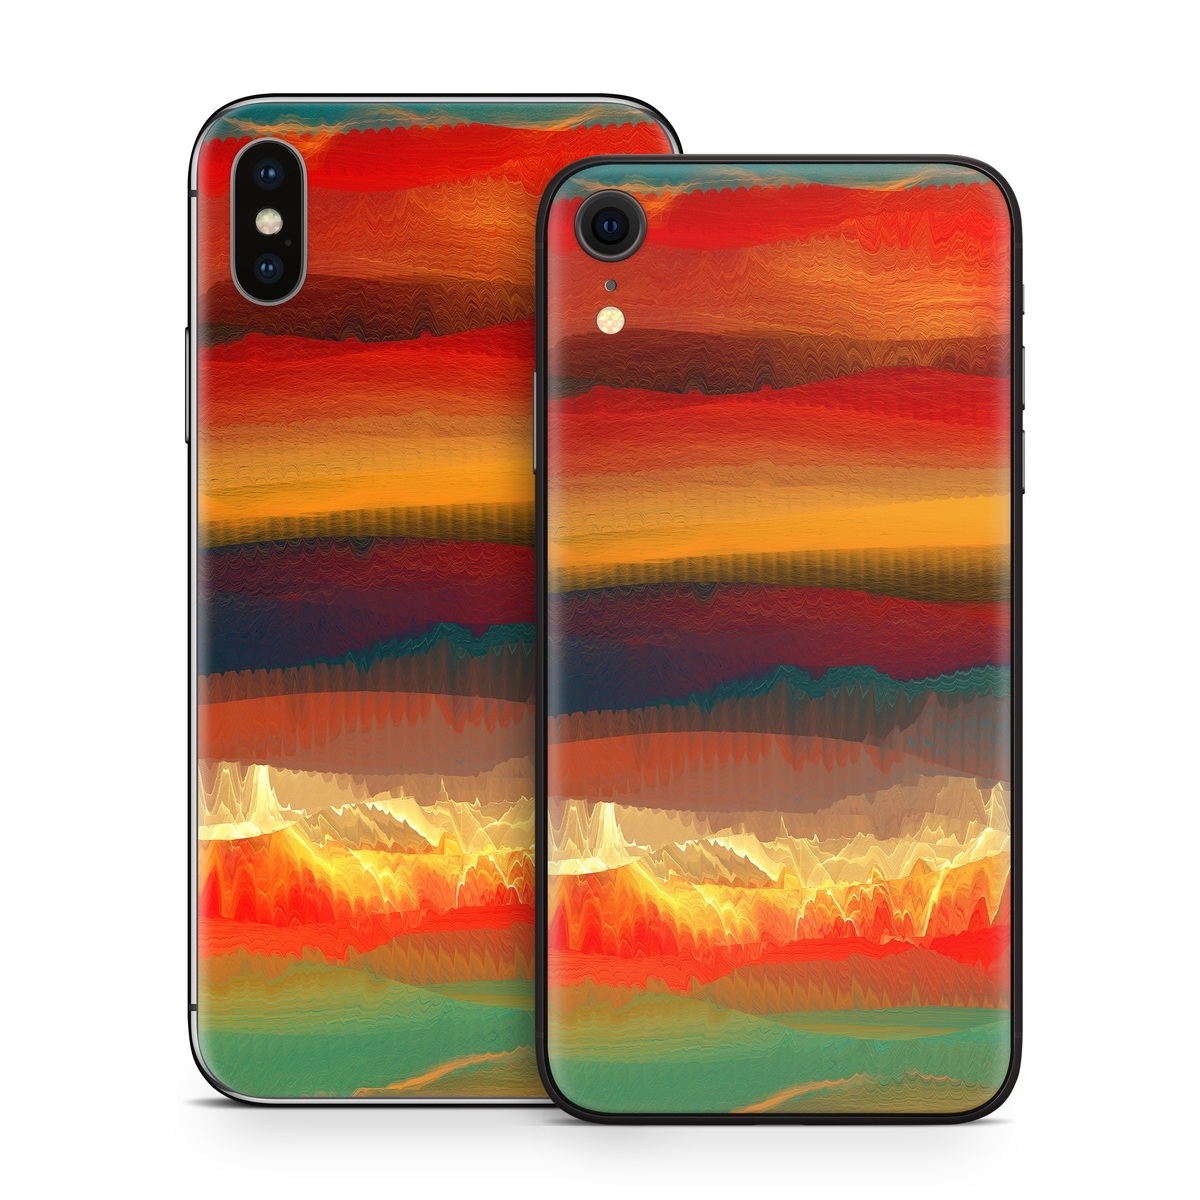 iPhone XS Skin design of Sky, Red, Horizon, Afterglow, Orange, Painting, Acrylic paint, Watercolor paint, Sunset, Geological phenomenon, with red, blue, green, yellow, orange, white colors